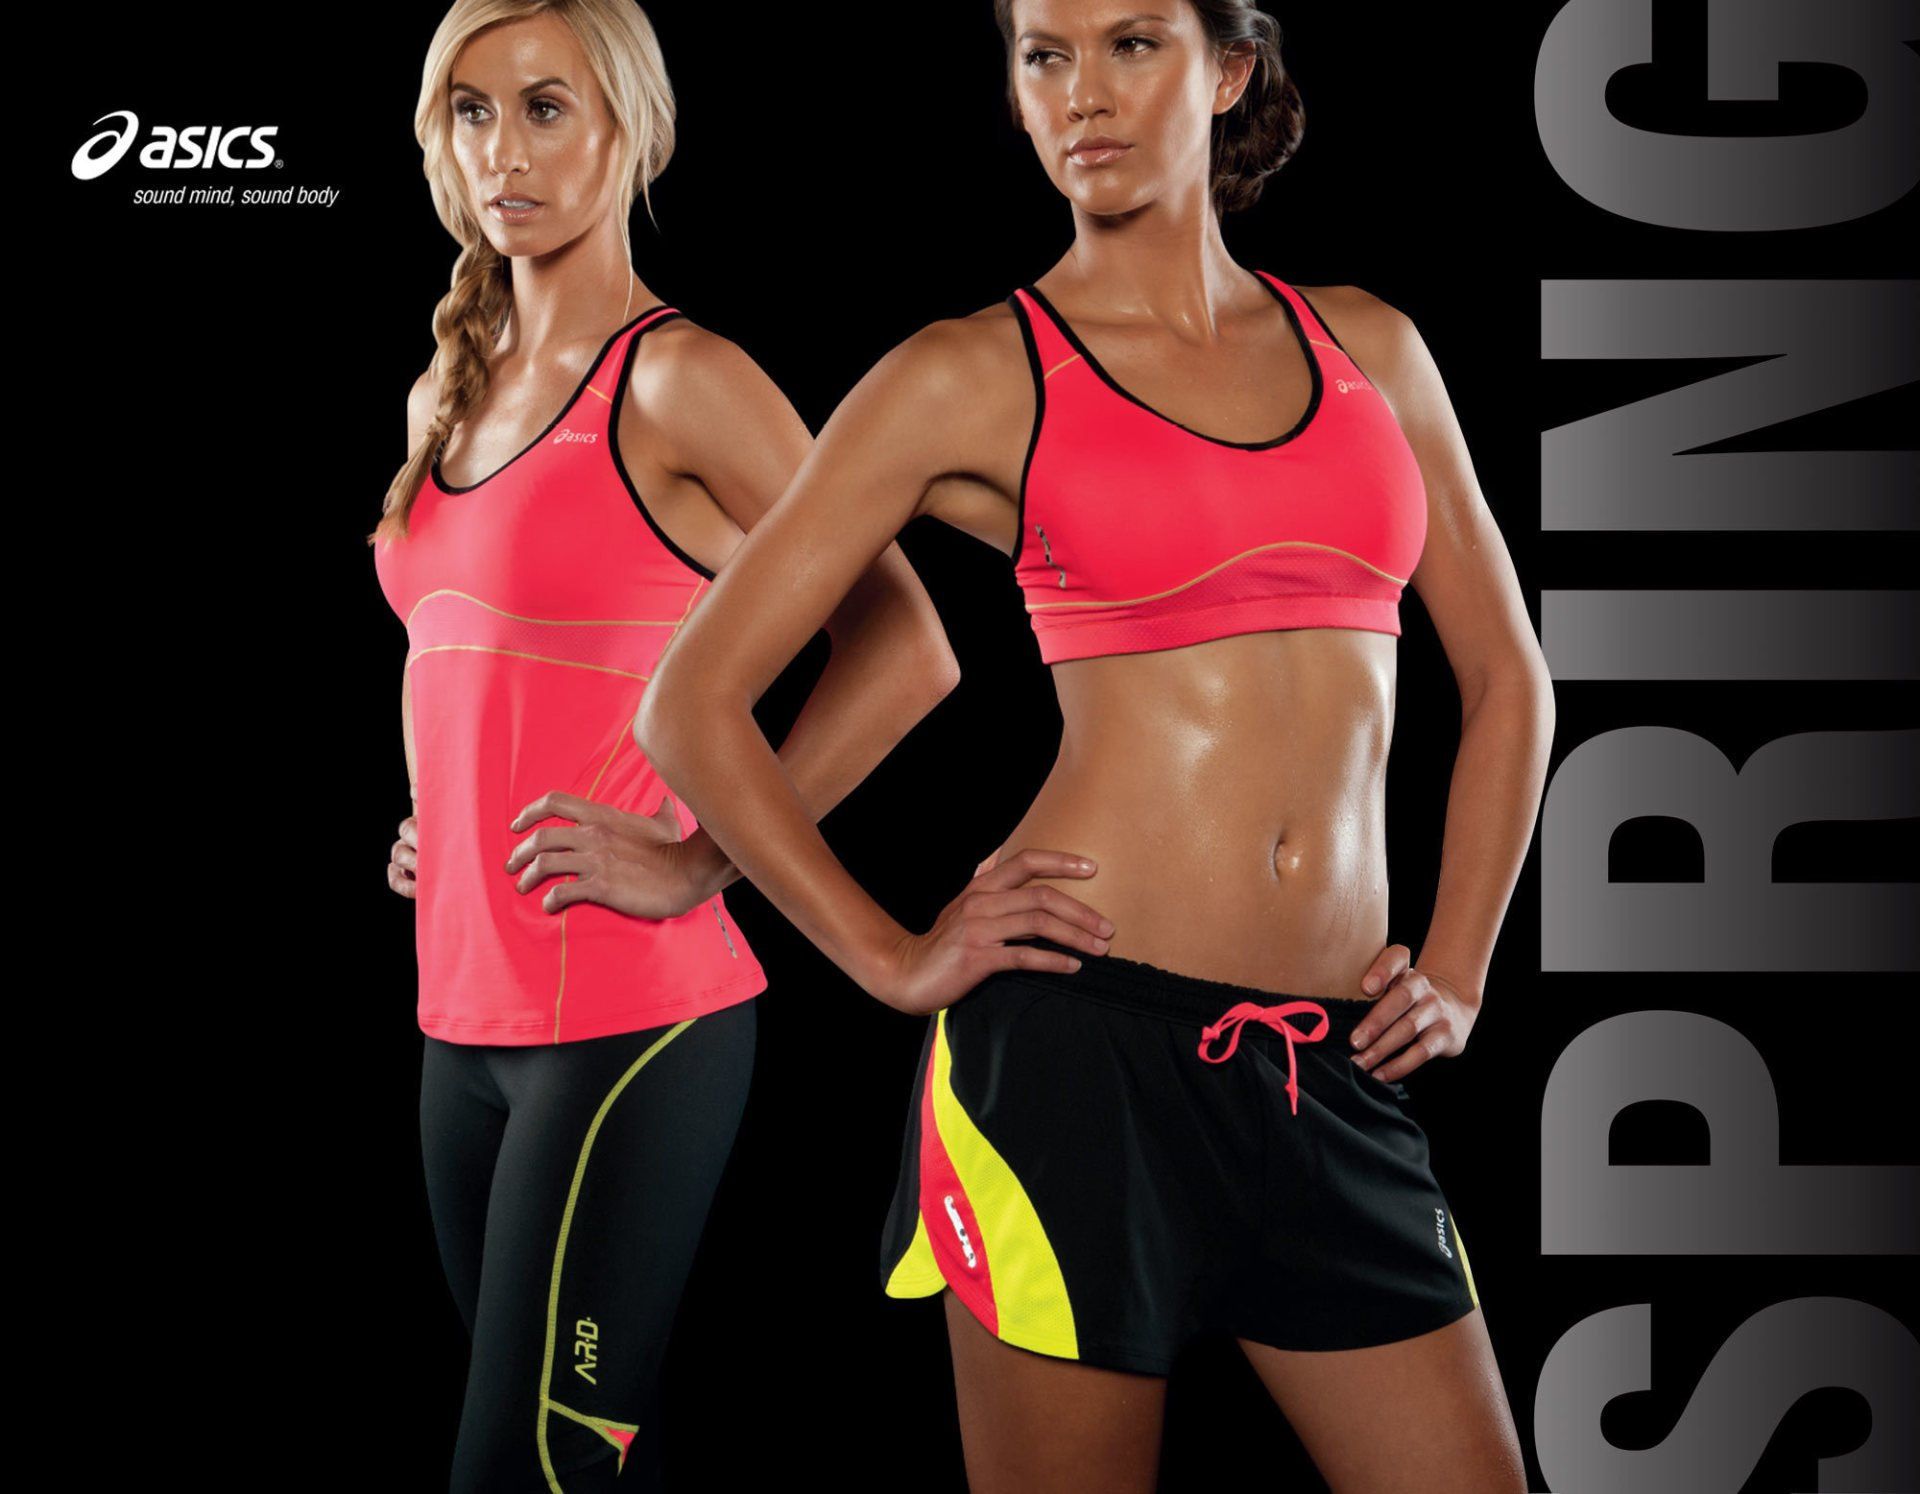 Cover of ASICS Spring Lookbook with two athletic women in bright colored tank, sports bra, & shorts